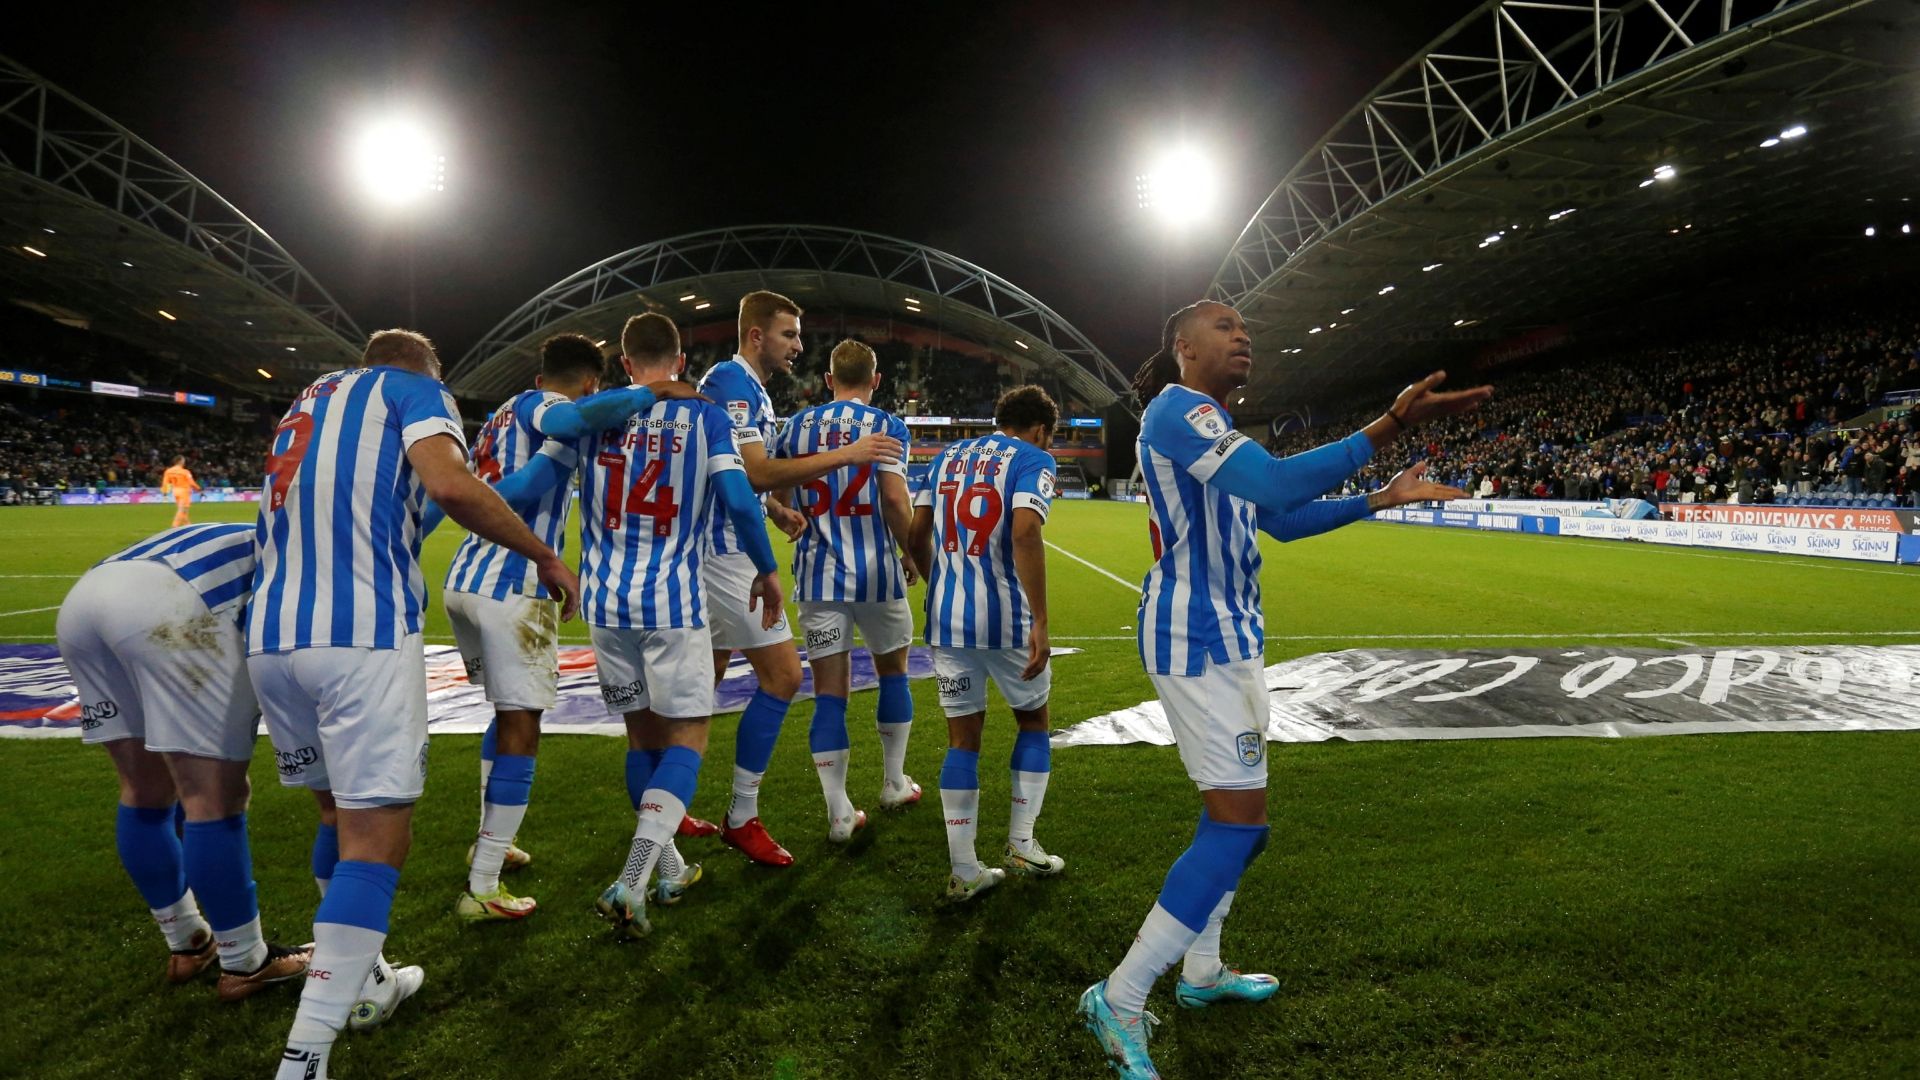 Huddersfield Town players general 22_23